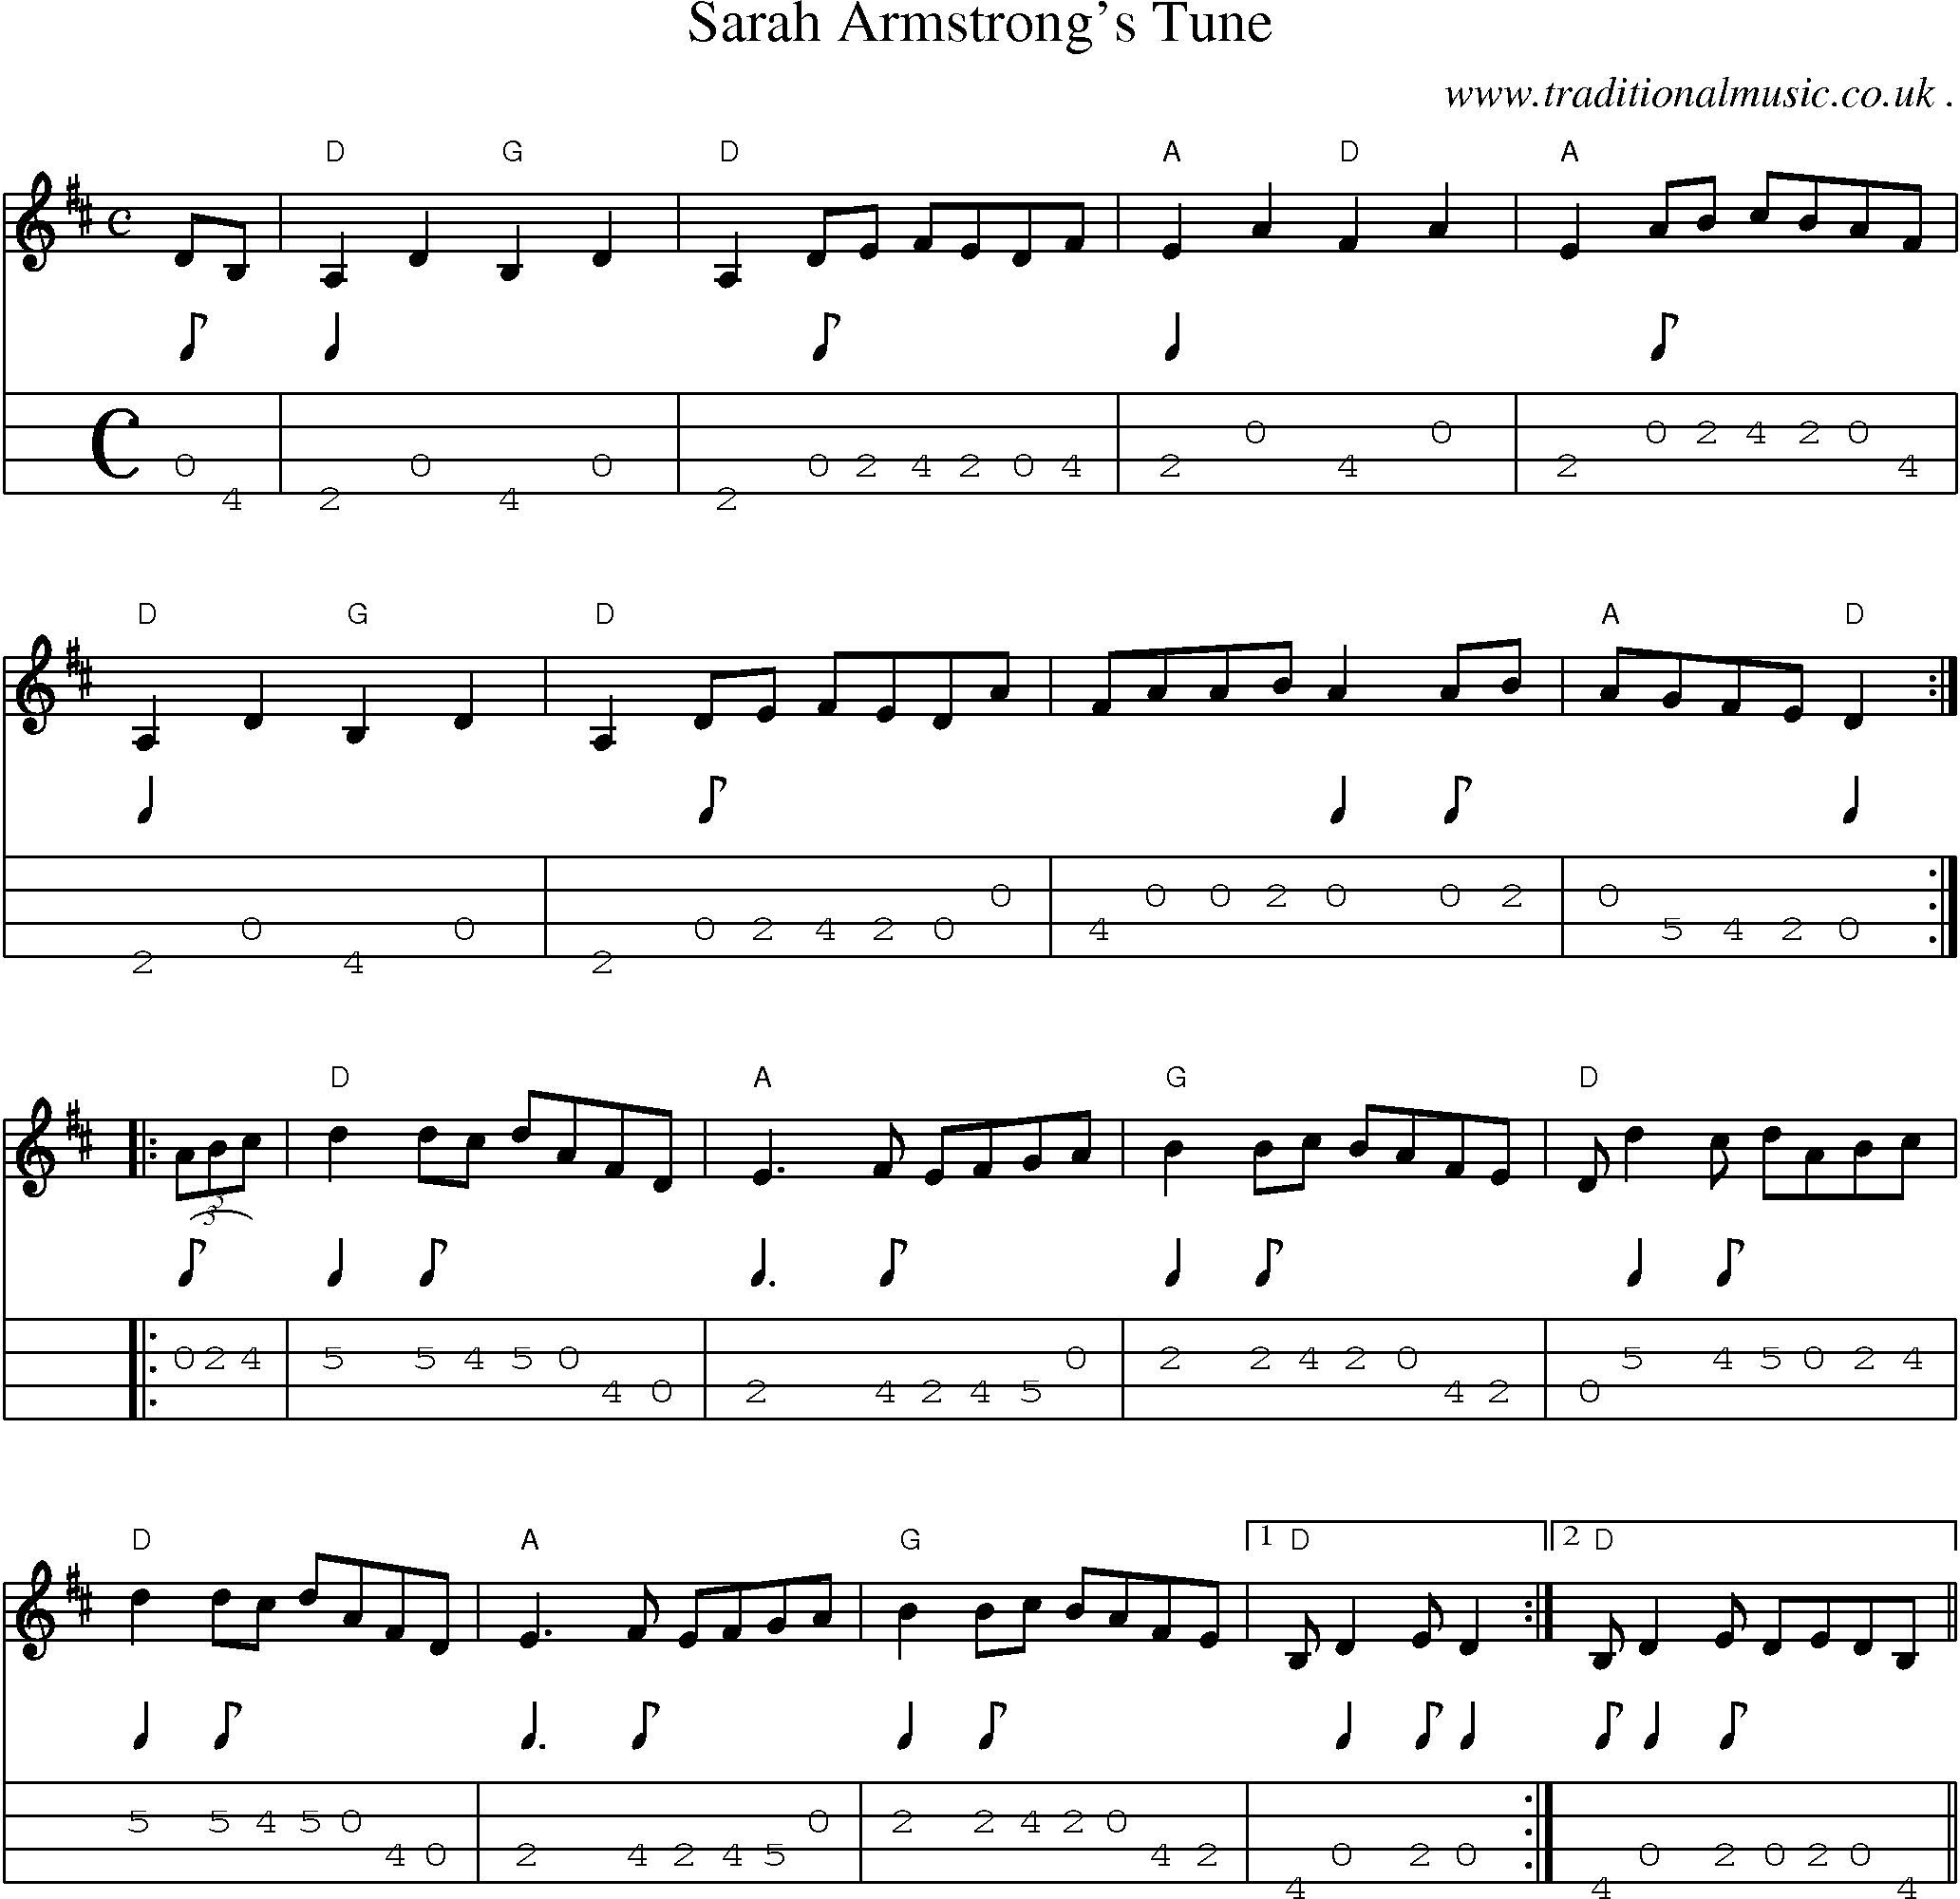 Music Score and Mandolin Tabs for Sarah Armstrongs Tune